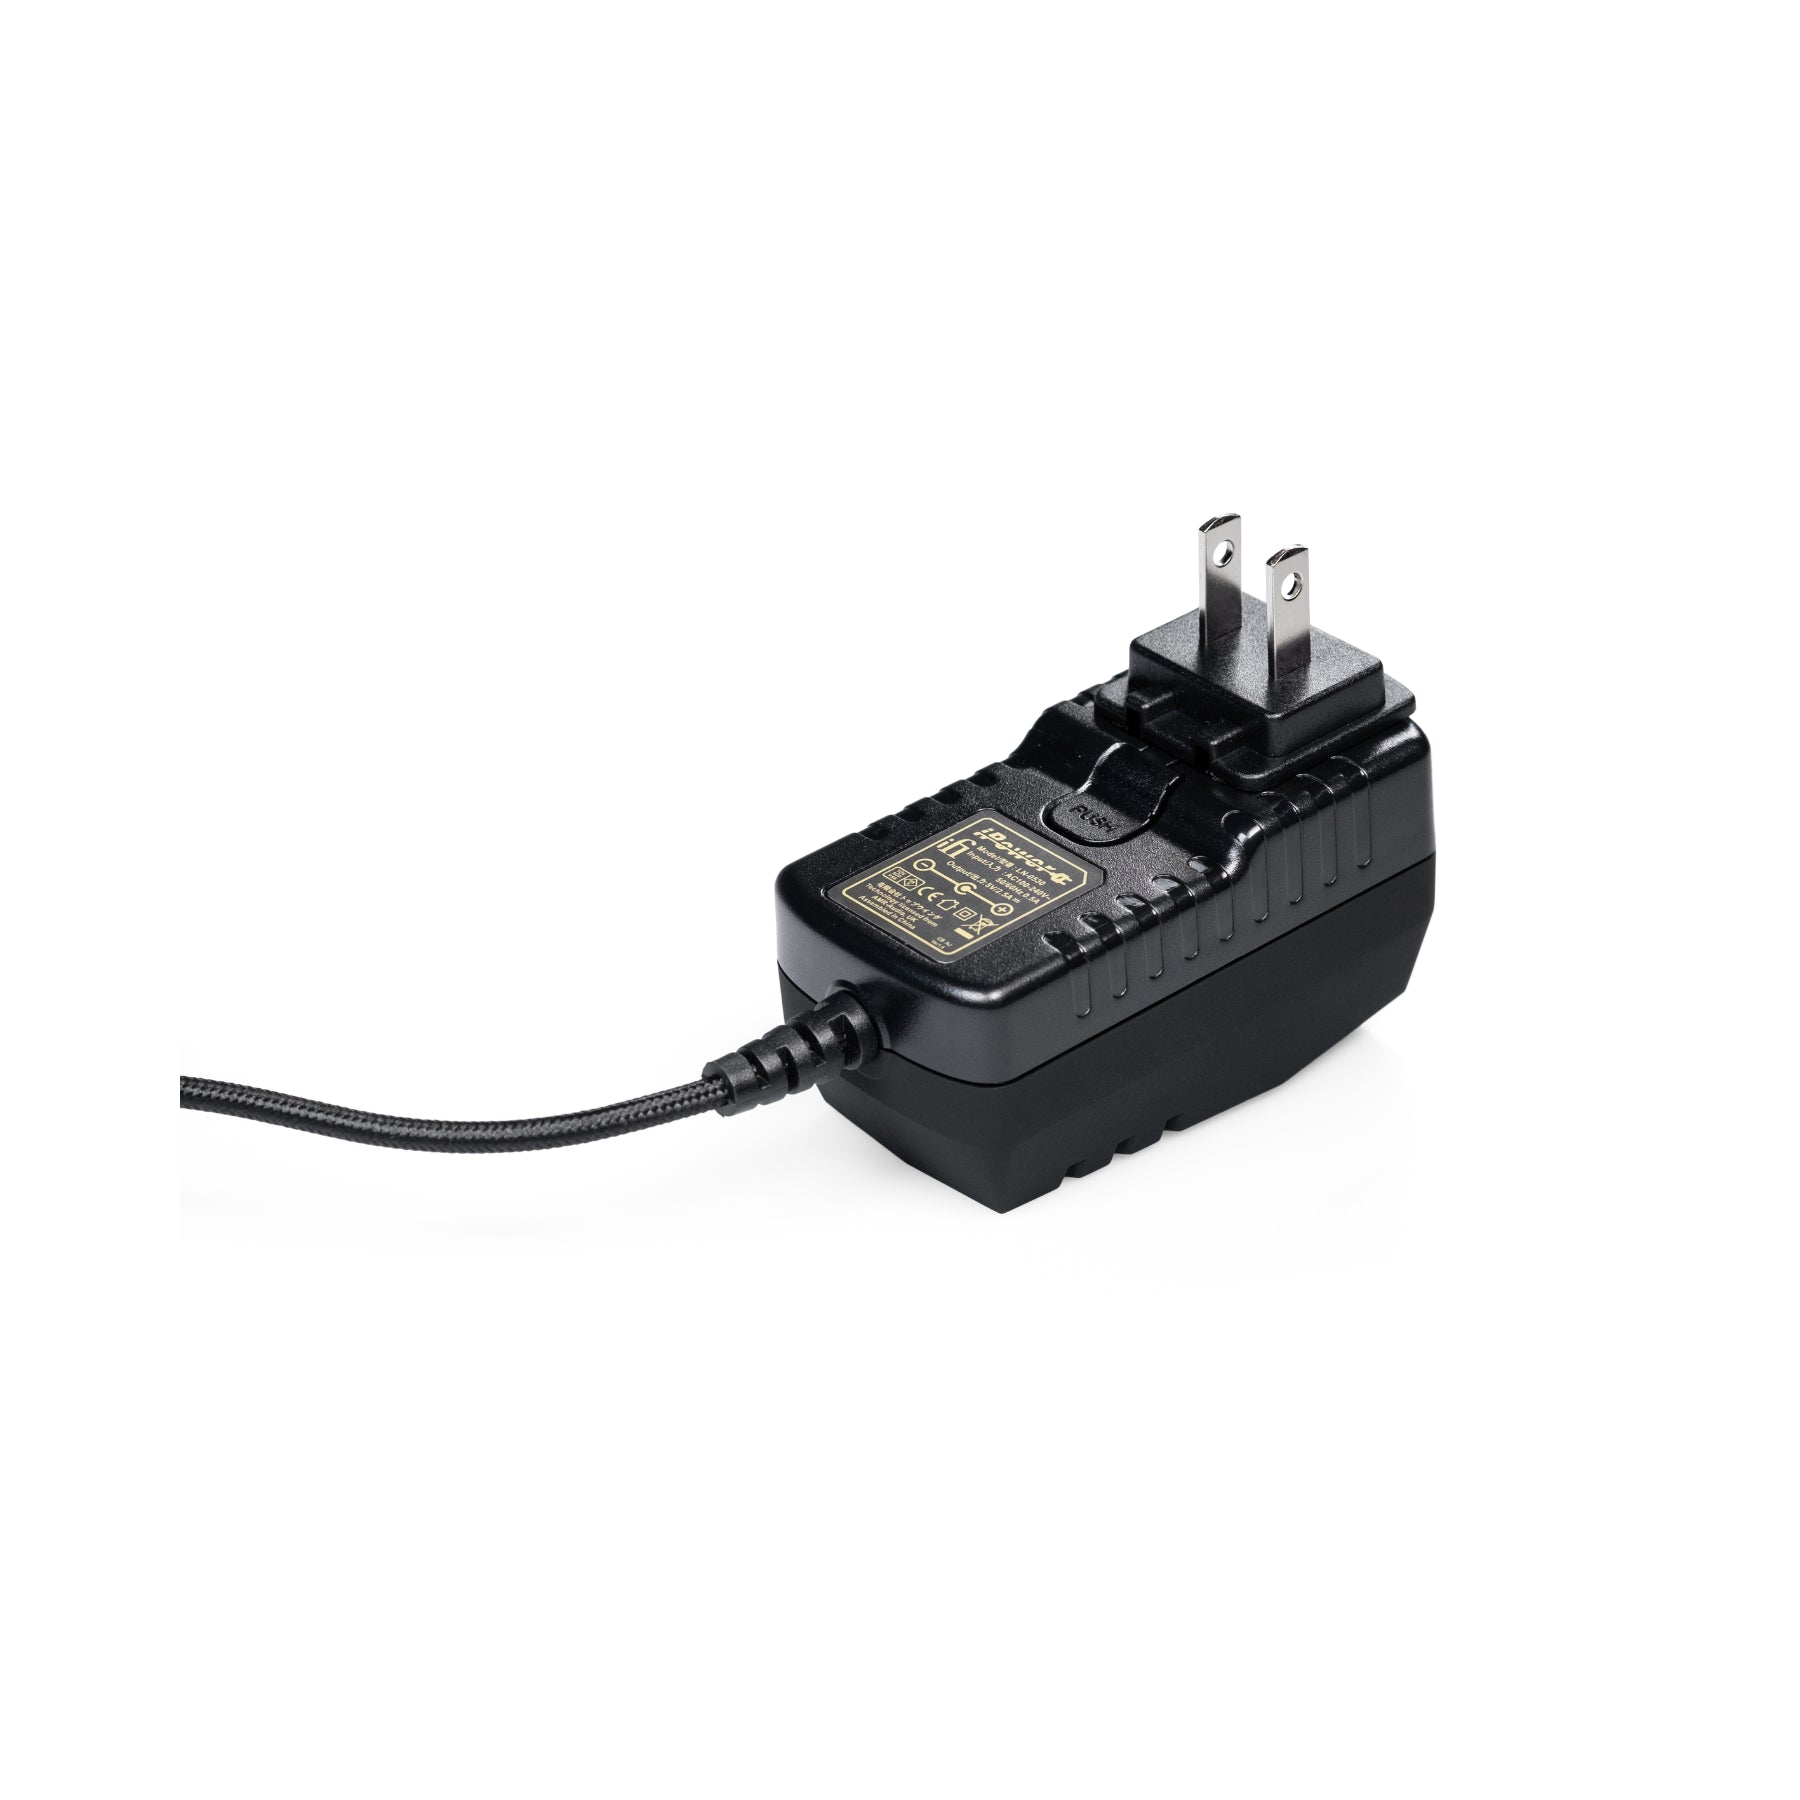 iFi SilentPower iPower2 - Low Noise DC Power Supply | ListenUp